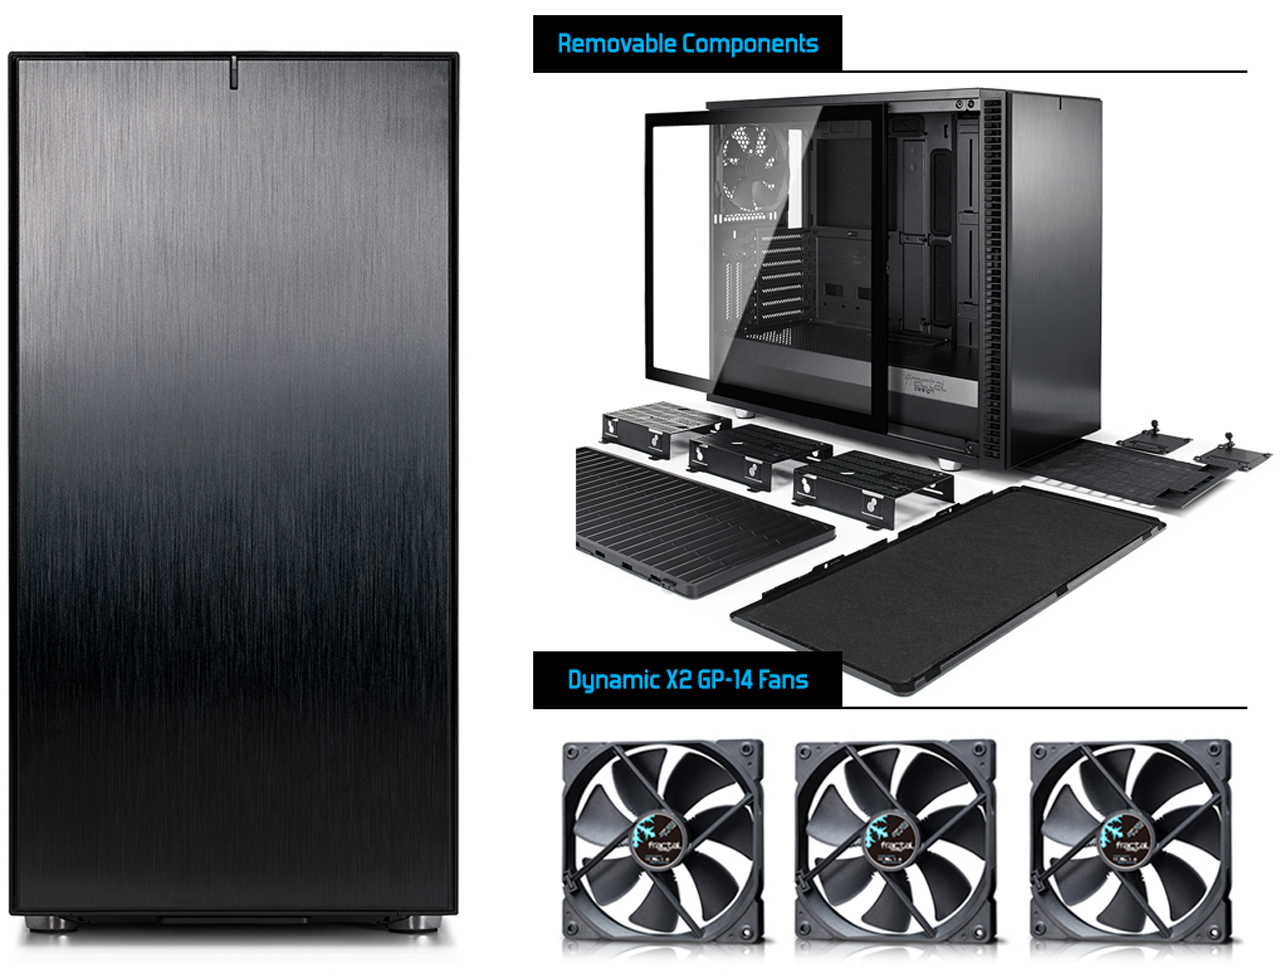 Define S2 front view and removable components and three fans